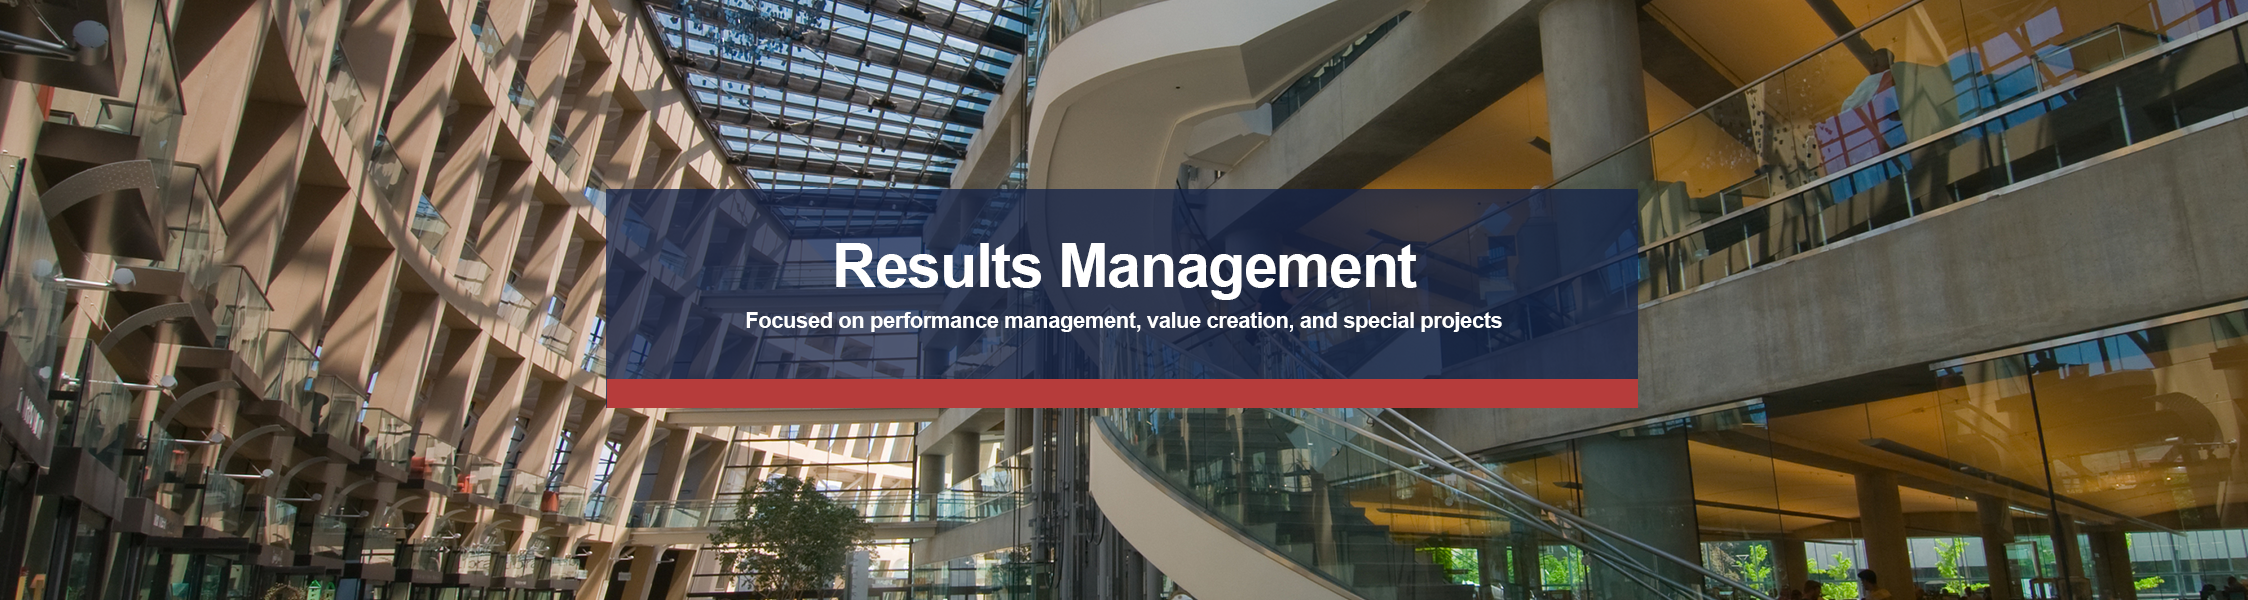 Results Management: Focused on performance management, value creation, and special projects